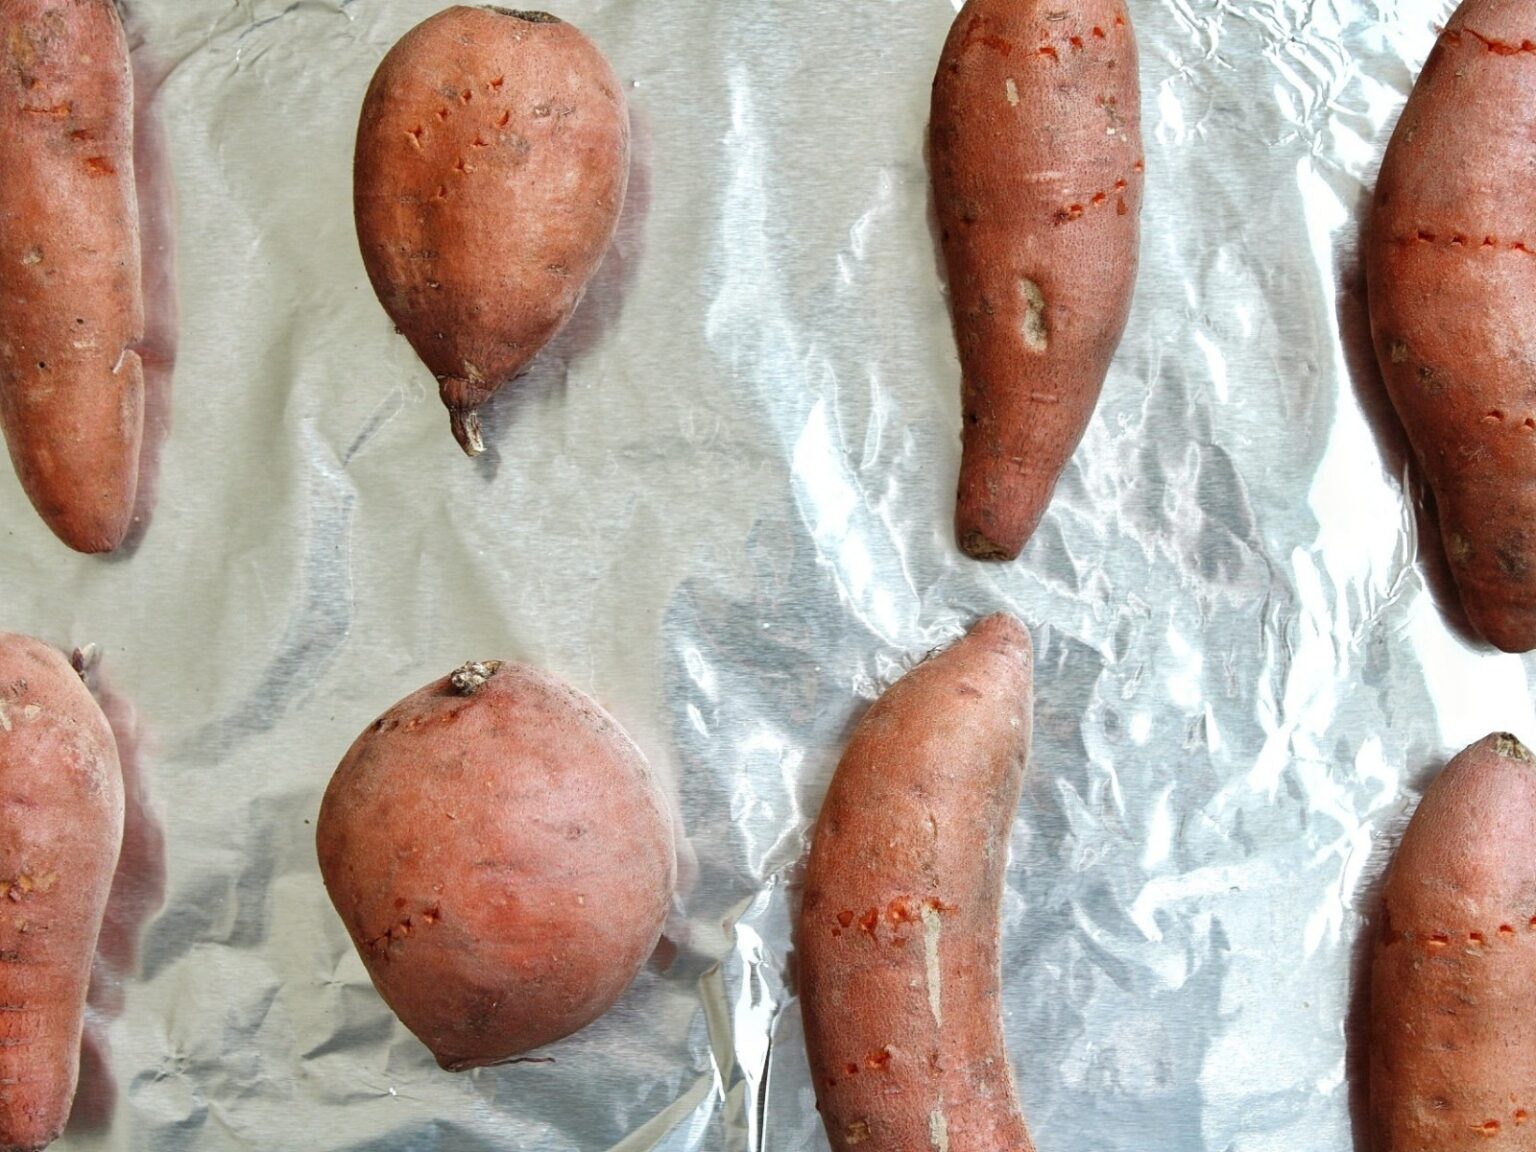 Uncooked sweet potatoes on a baking sheetlined with aluminum foil.